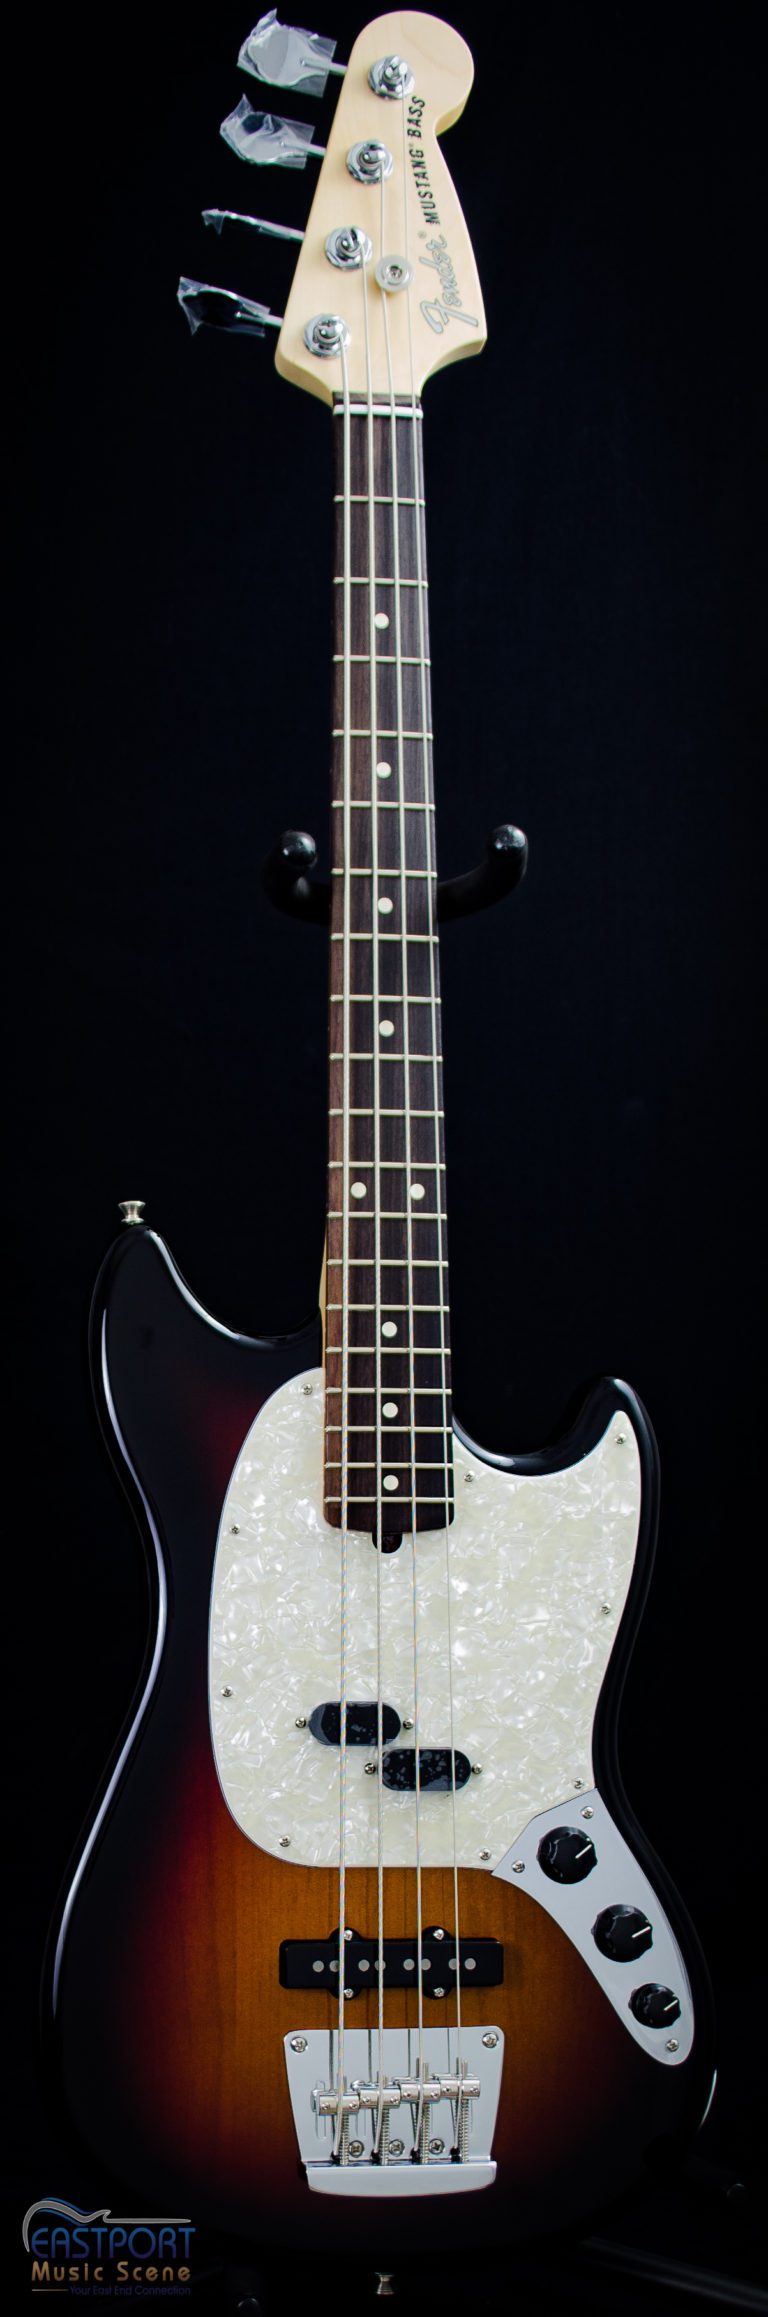 A black and white guitar is in front of a black background